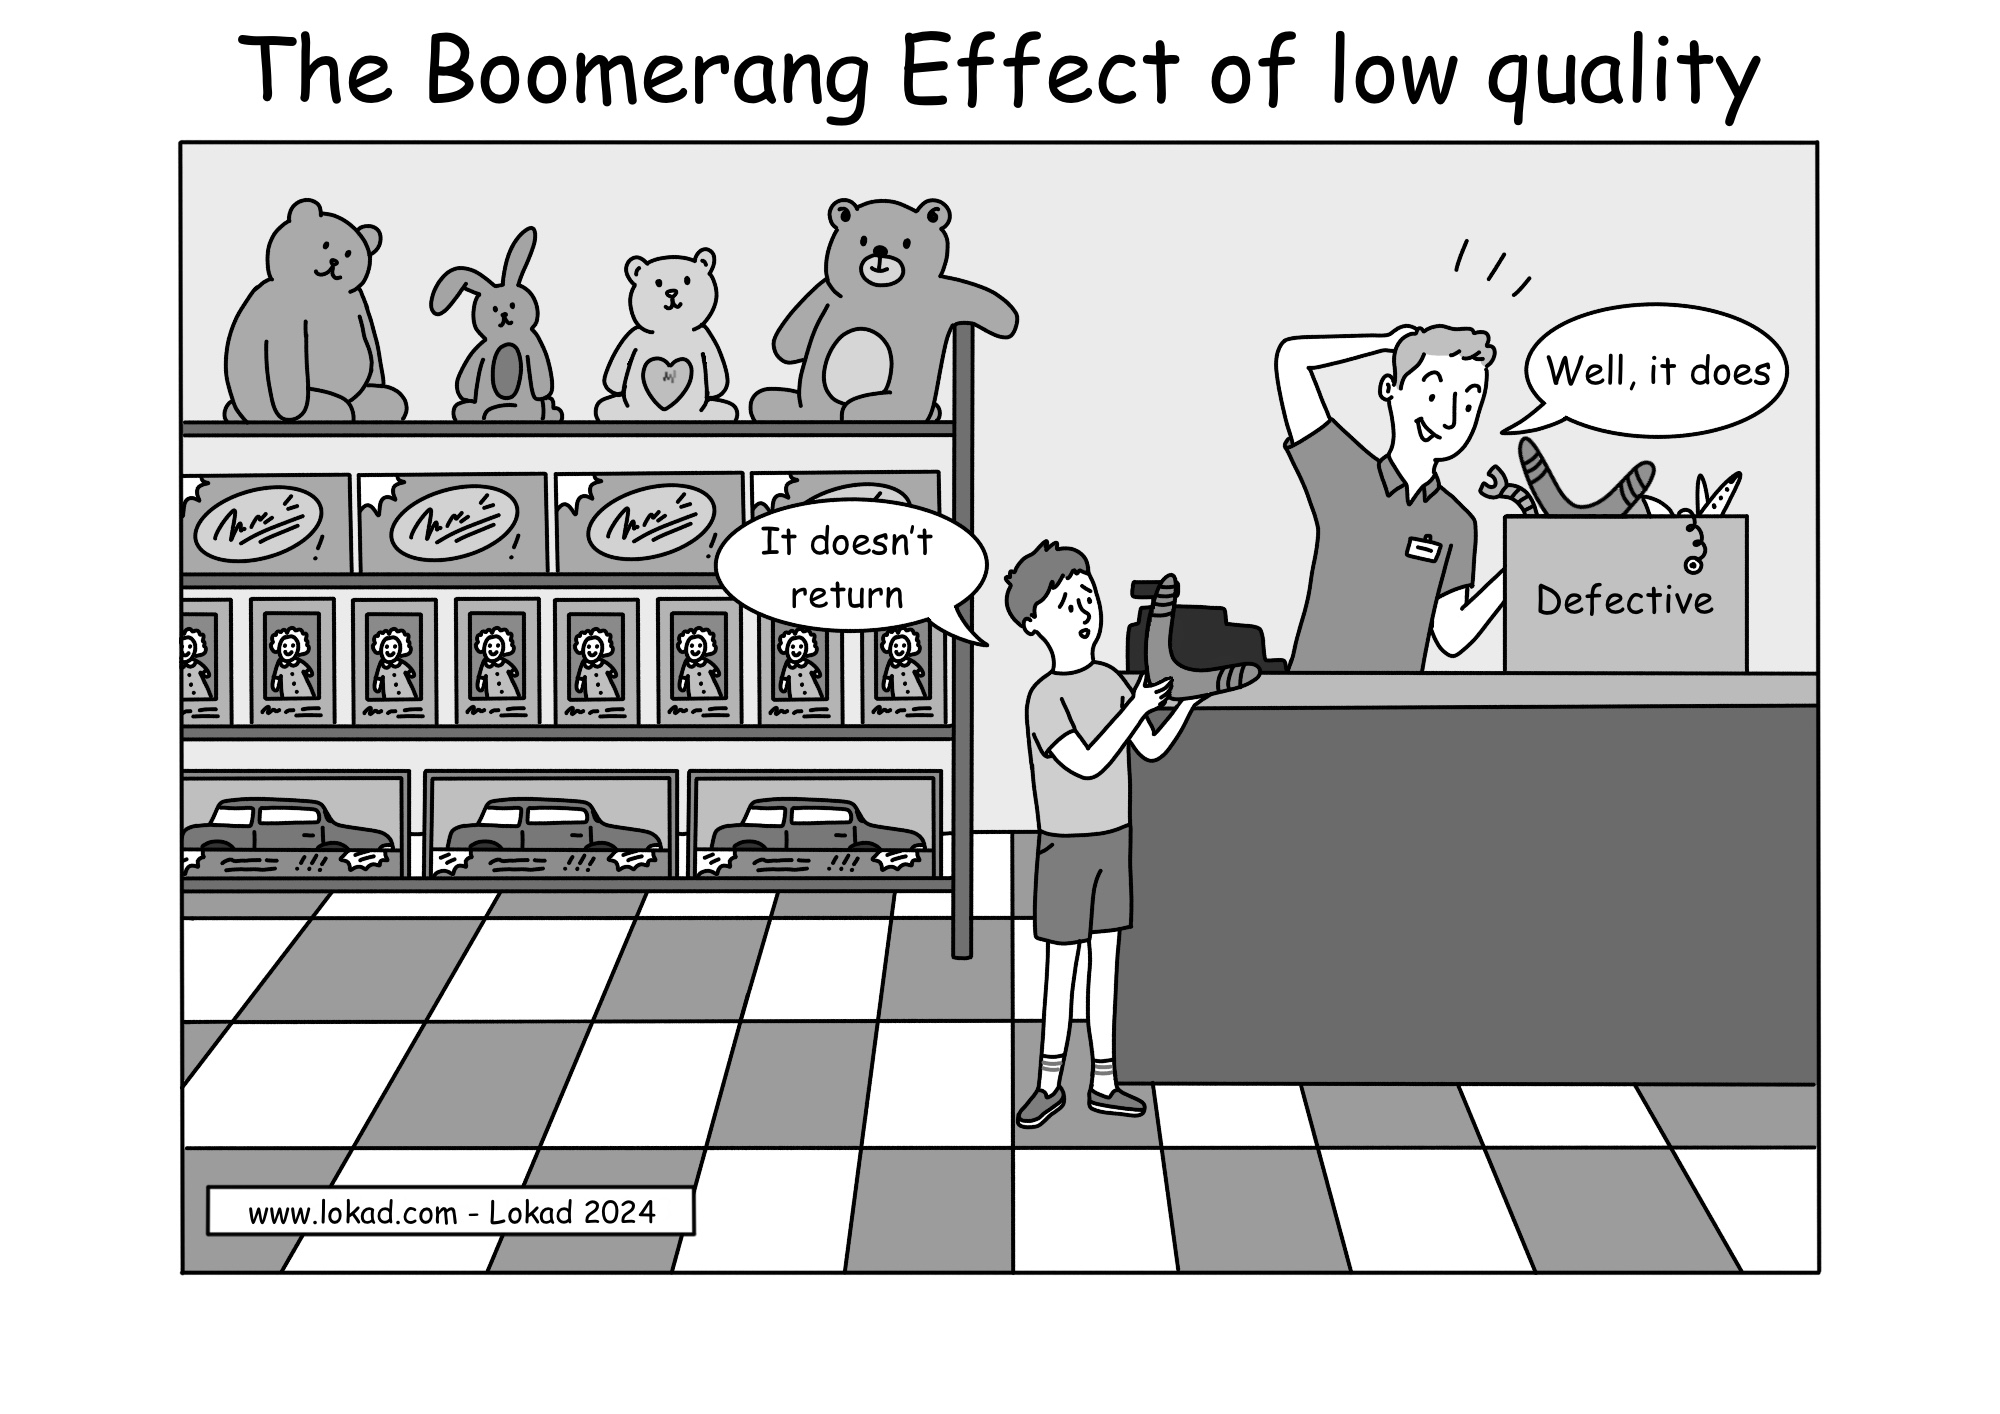 The Boomerang Effect of low quality.